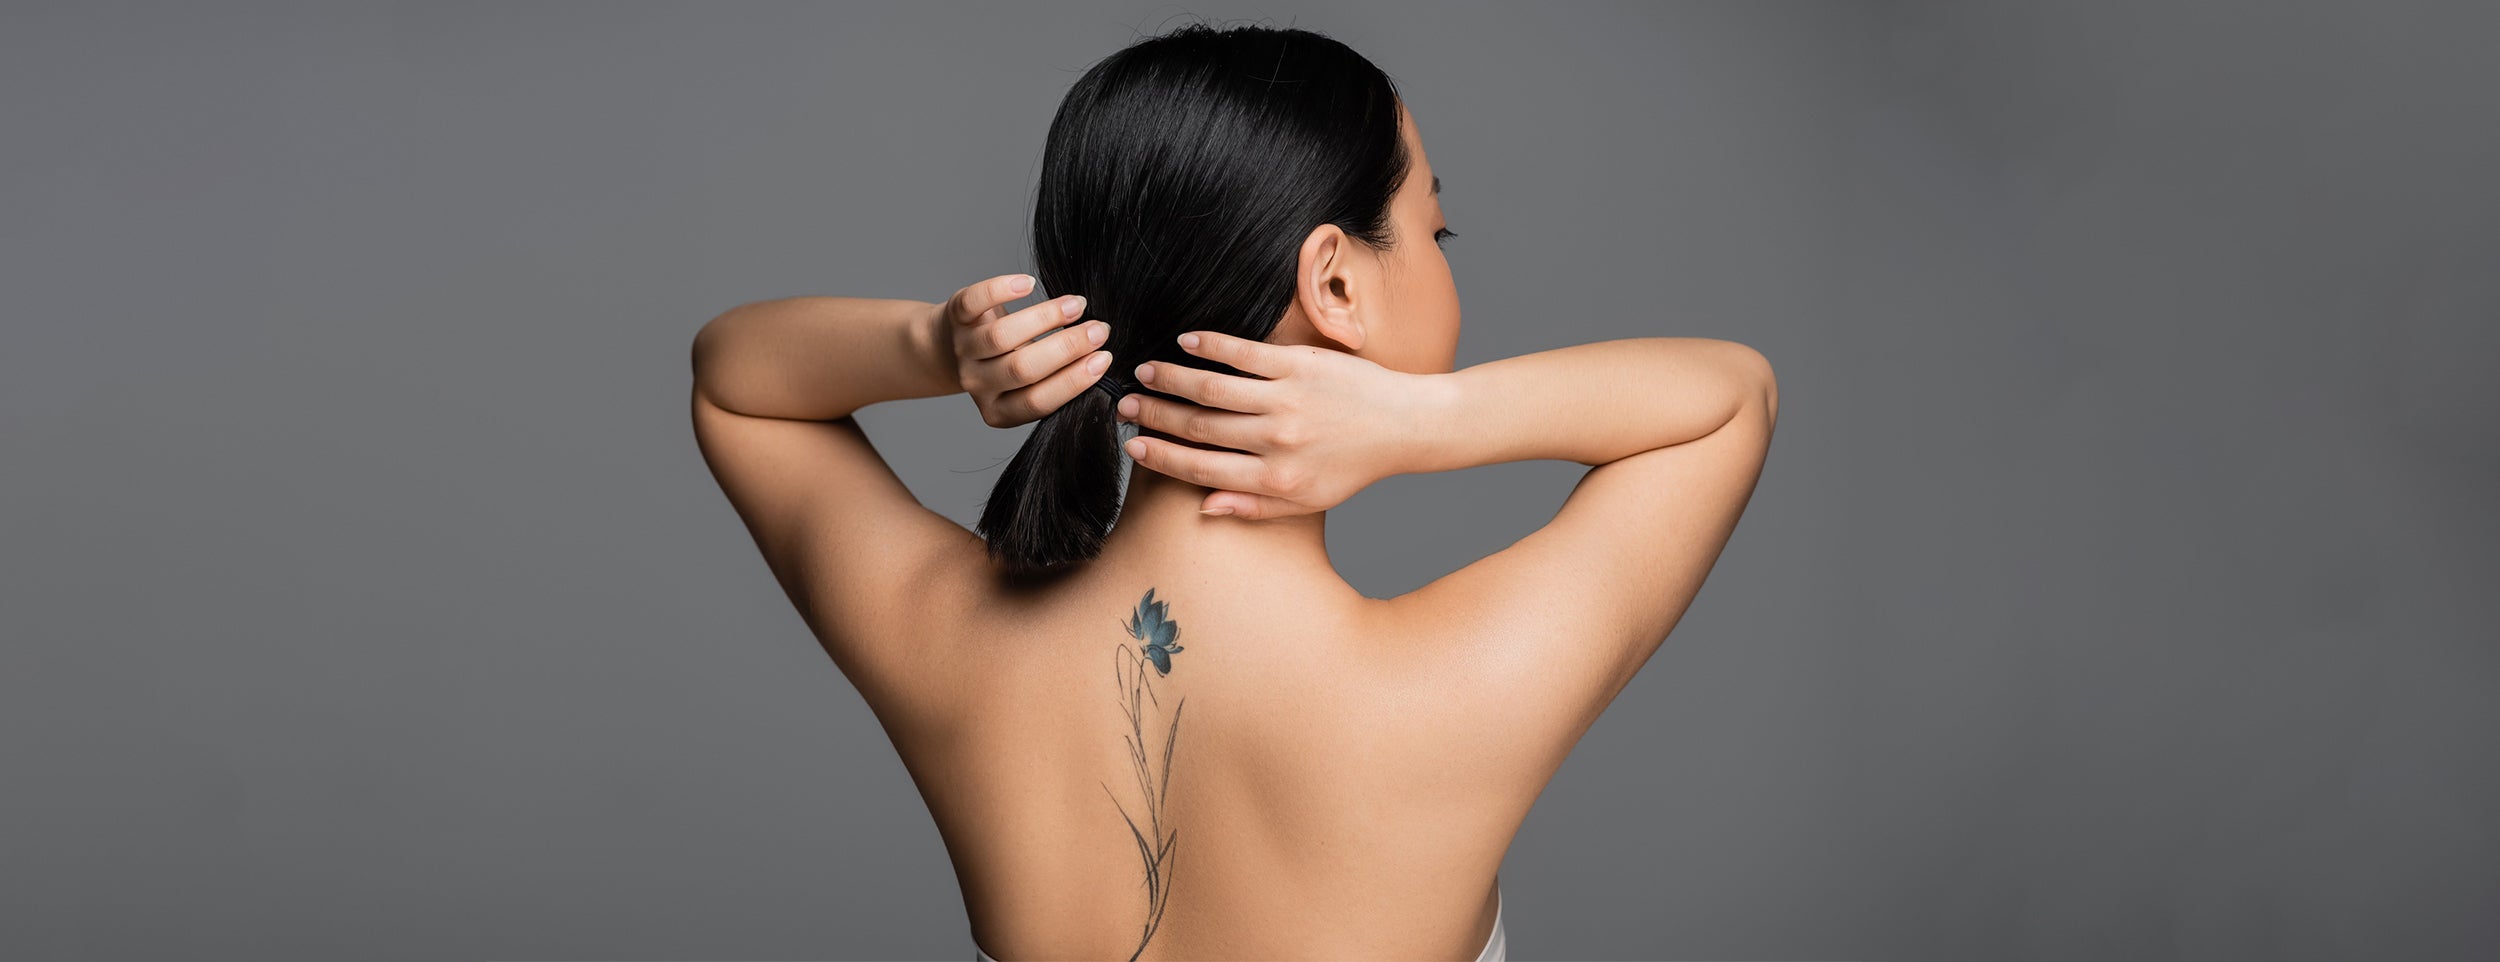 7 Precautions for Spine Tattoos and Paralysis